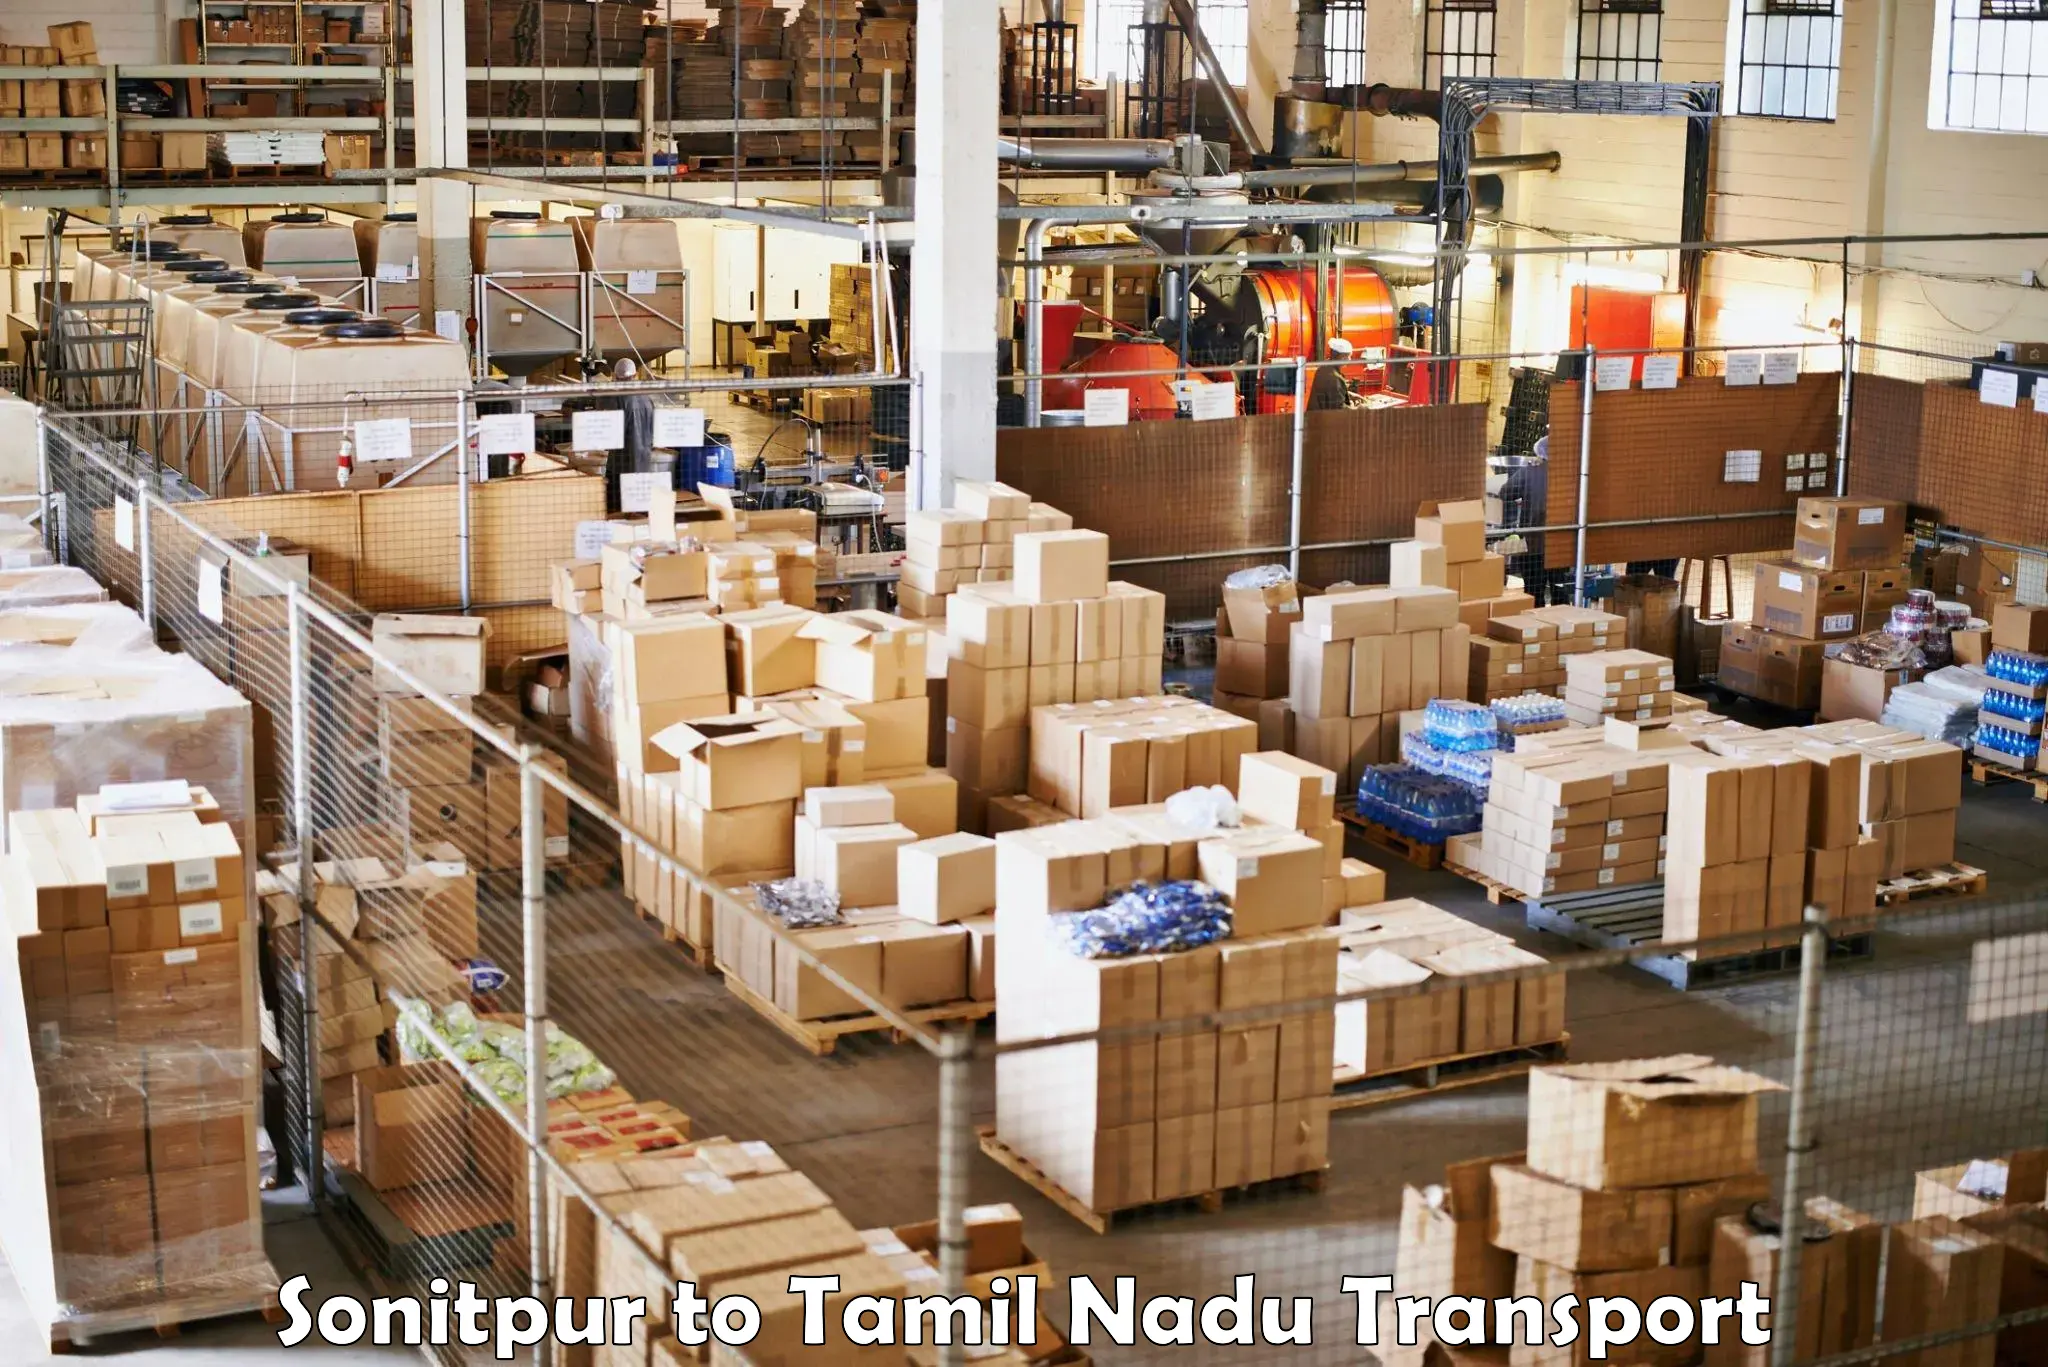 Shipping services Sonitpur to Eraiyur